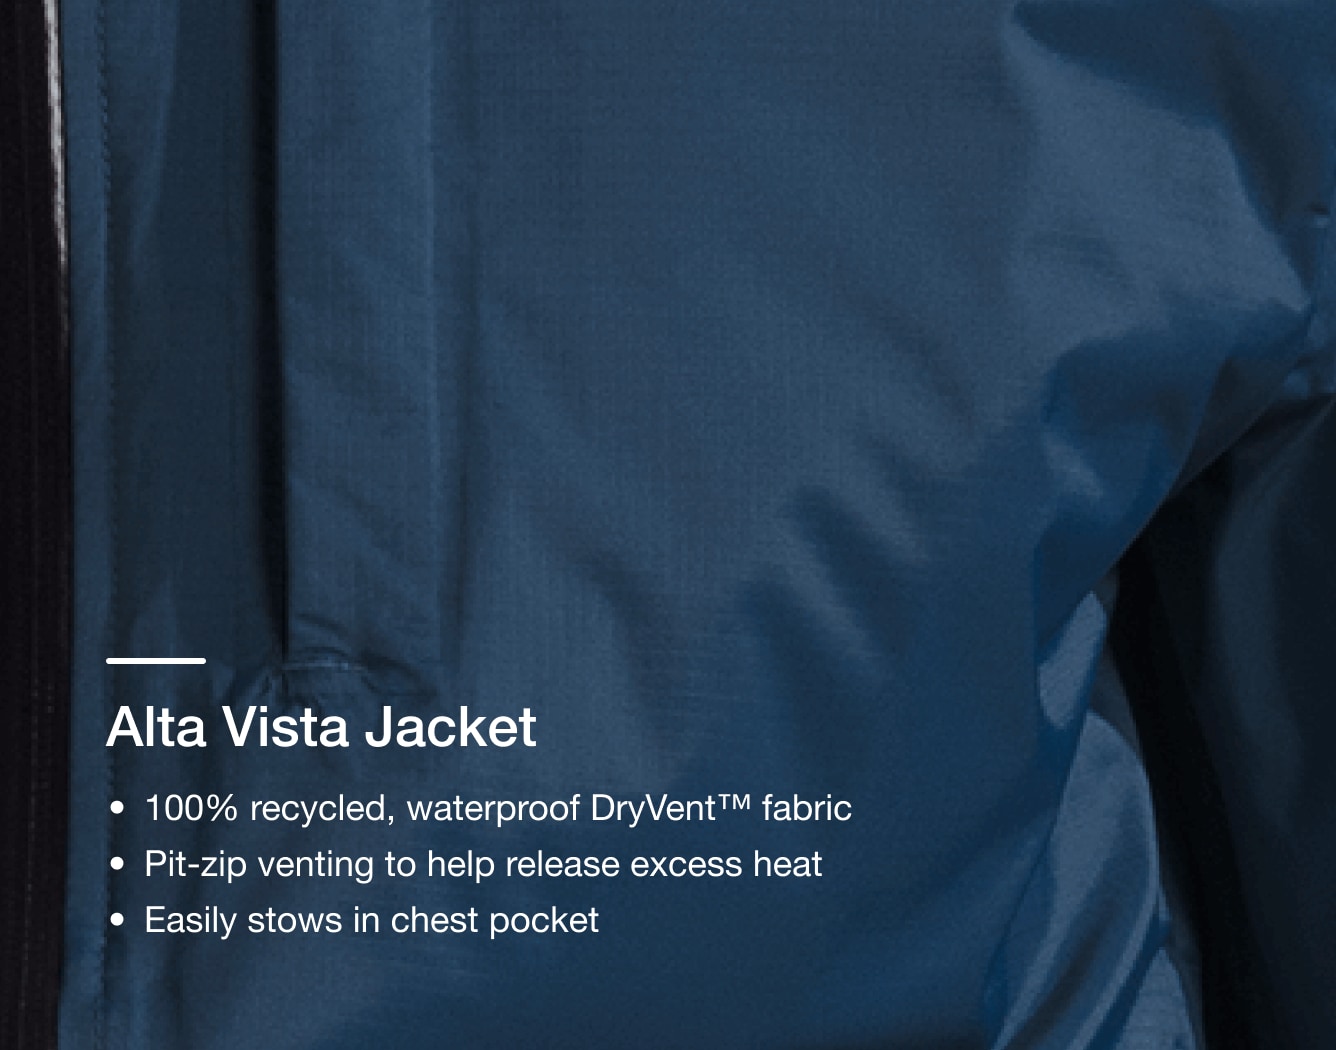 A close-up shot of the waterproof fabric used for the Alta Vista Jacket. 